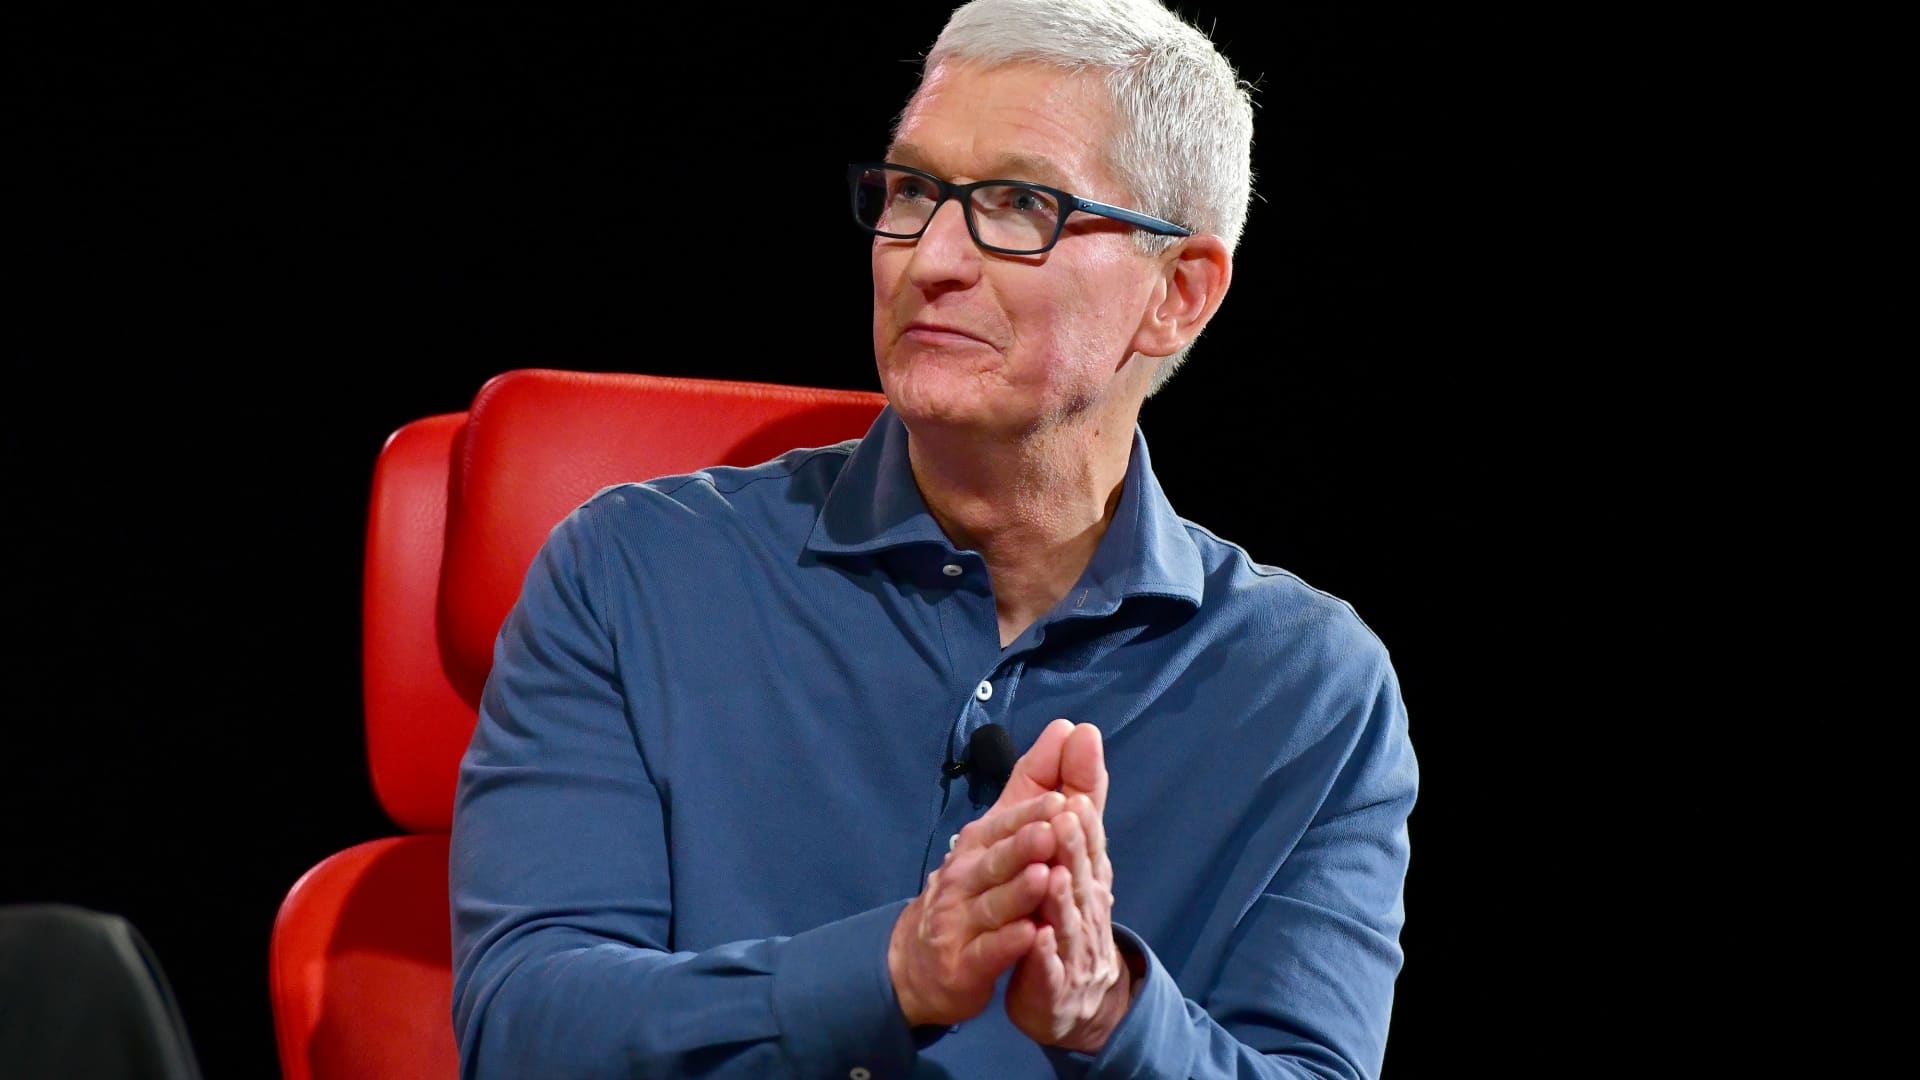 Apple telegraphed that things are getting better after a tough quarter — here’s how to interpret its remarks